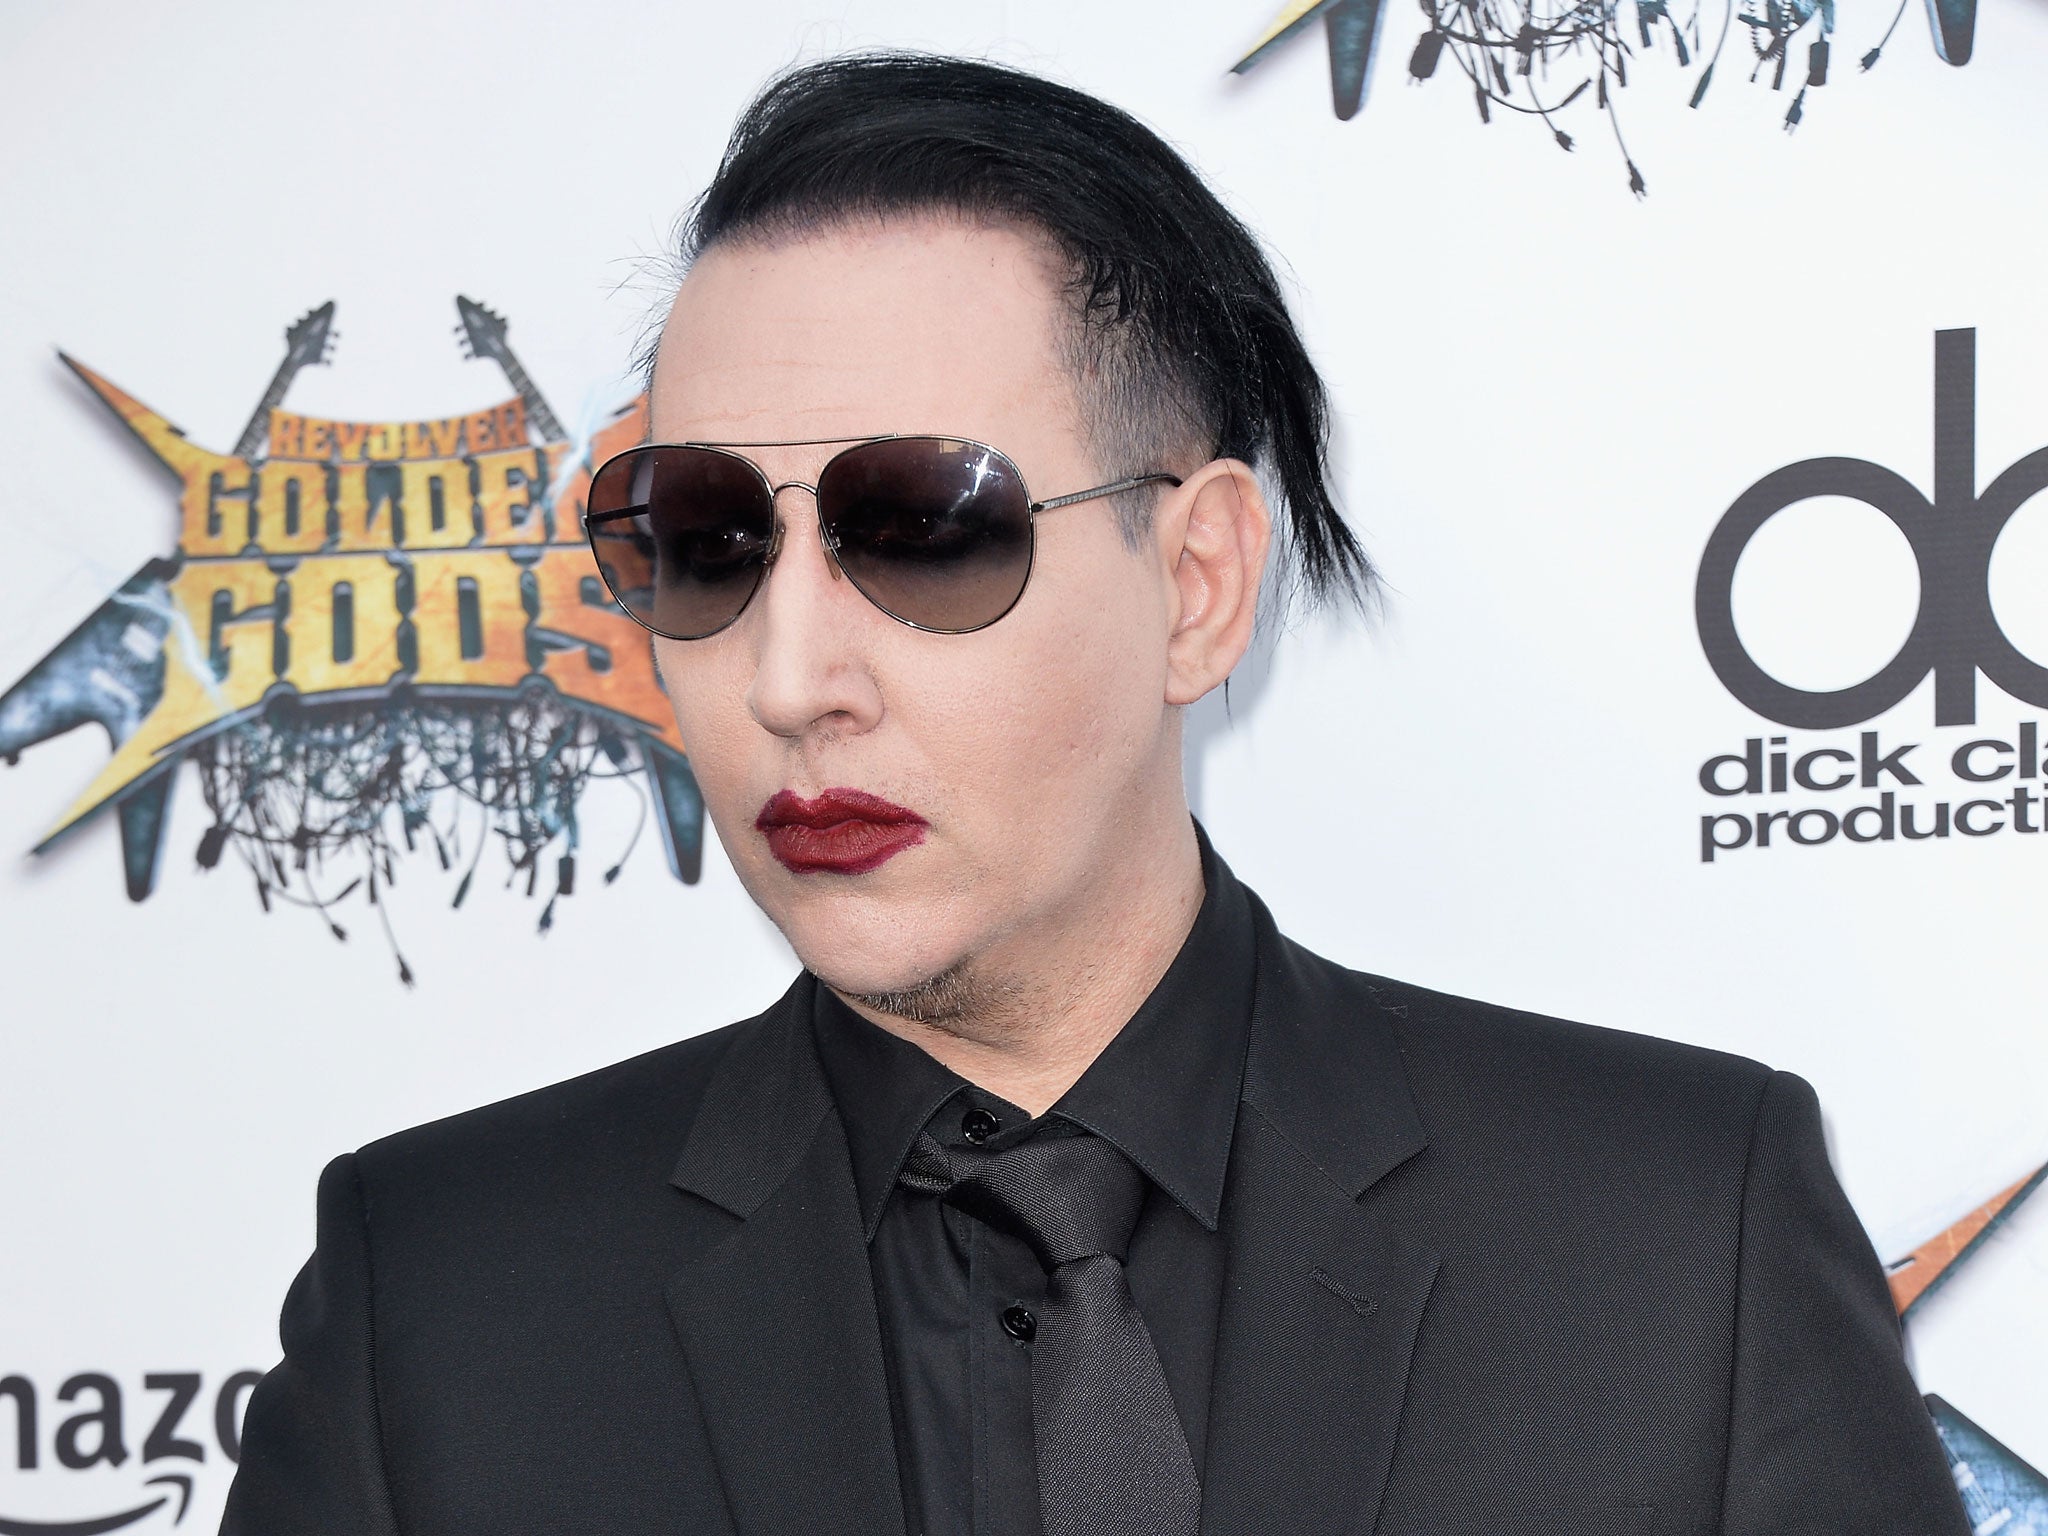 Marilyn Manson attends the 6th Annual Revolver Golden Gods Award Show at Club Nokia on 23 April, 2014, in Los Angeles